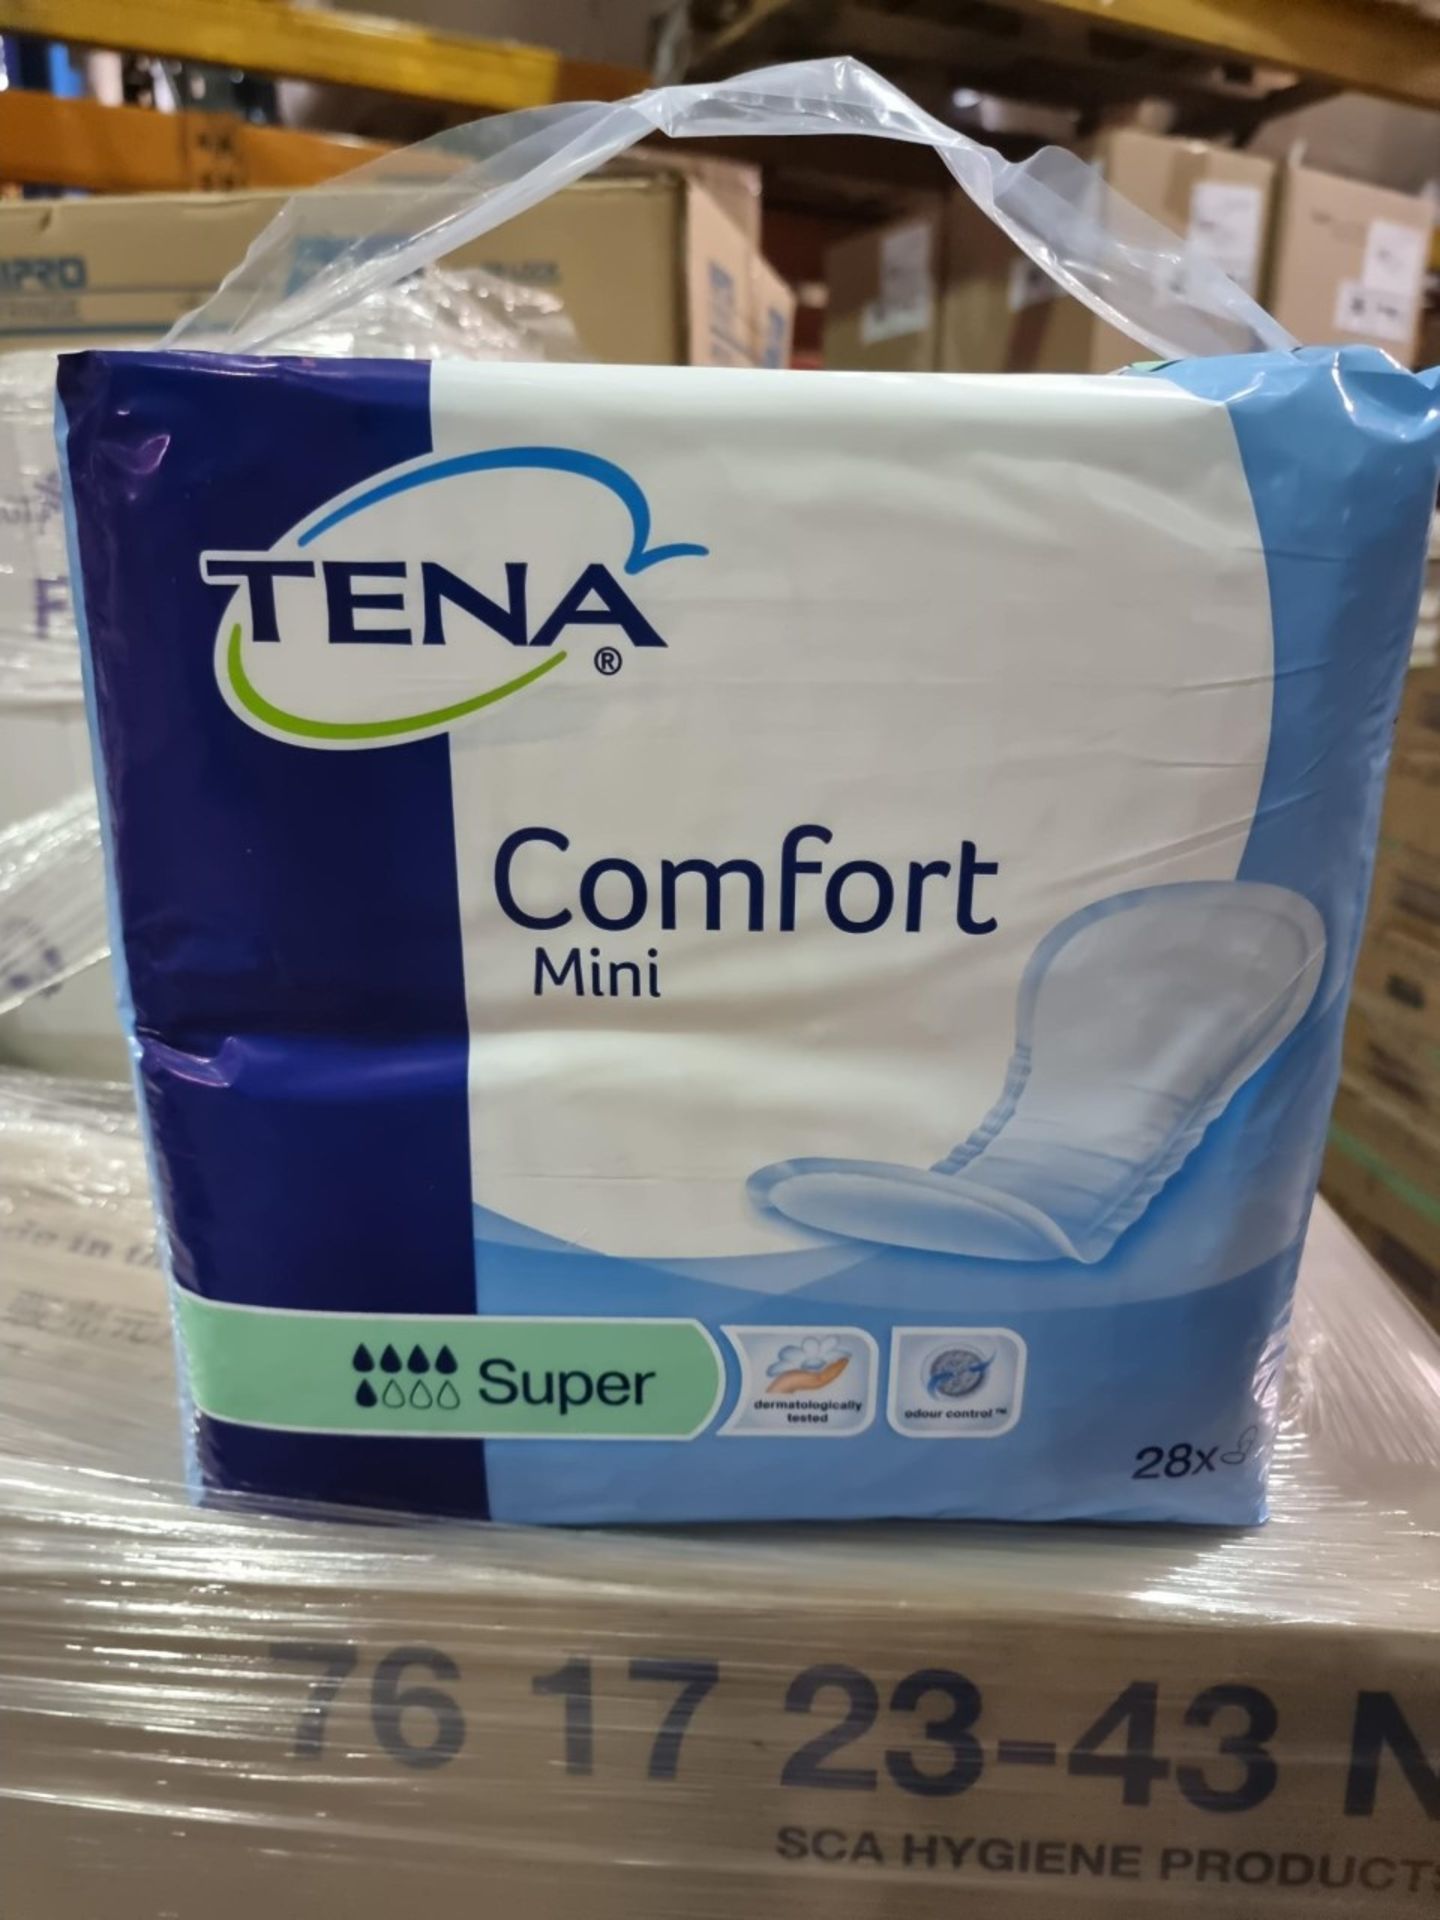 NO VAT (J204) PALLET TO CONTAIN 72 x NEW SEALED PACKS OF 28 TENA COMFORT MINI SUPER PADS